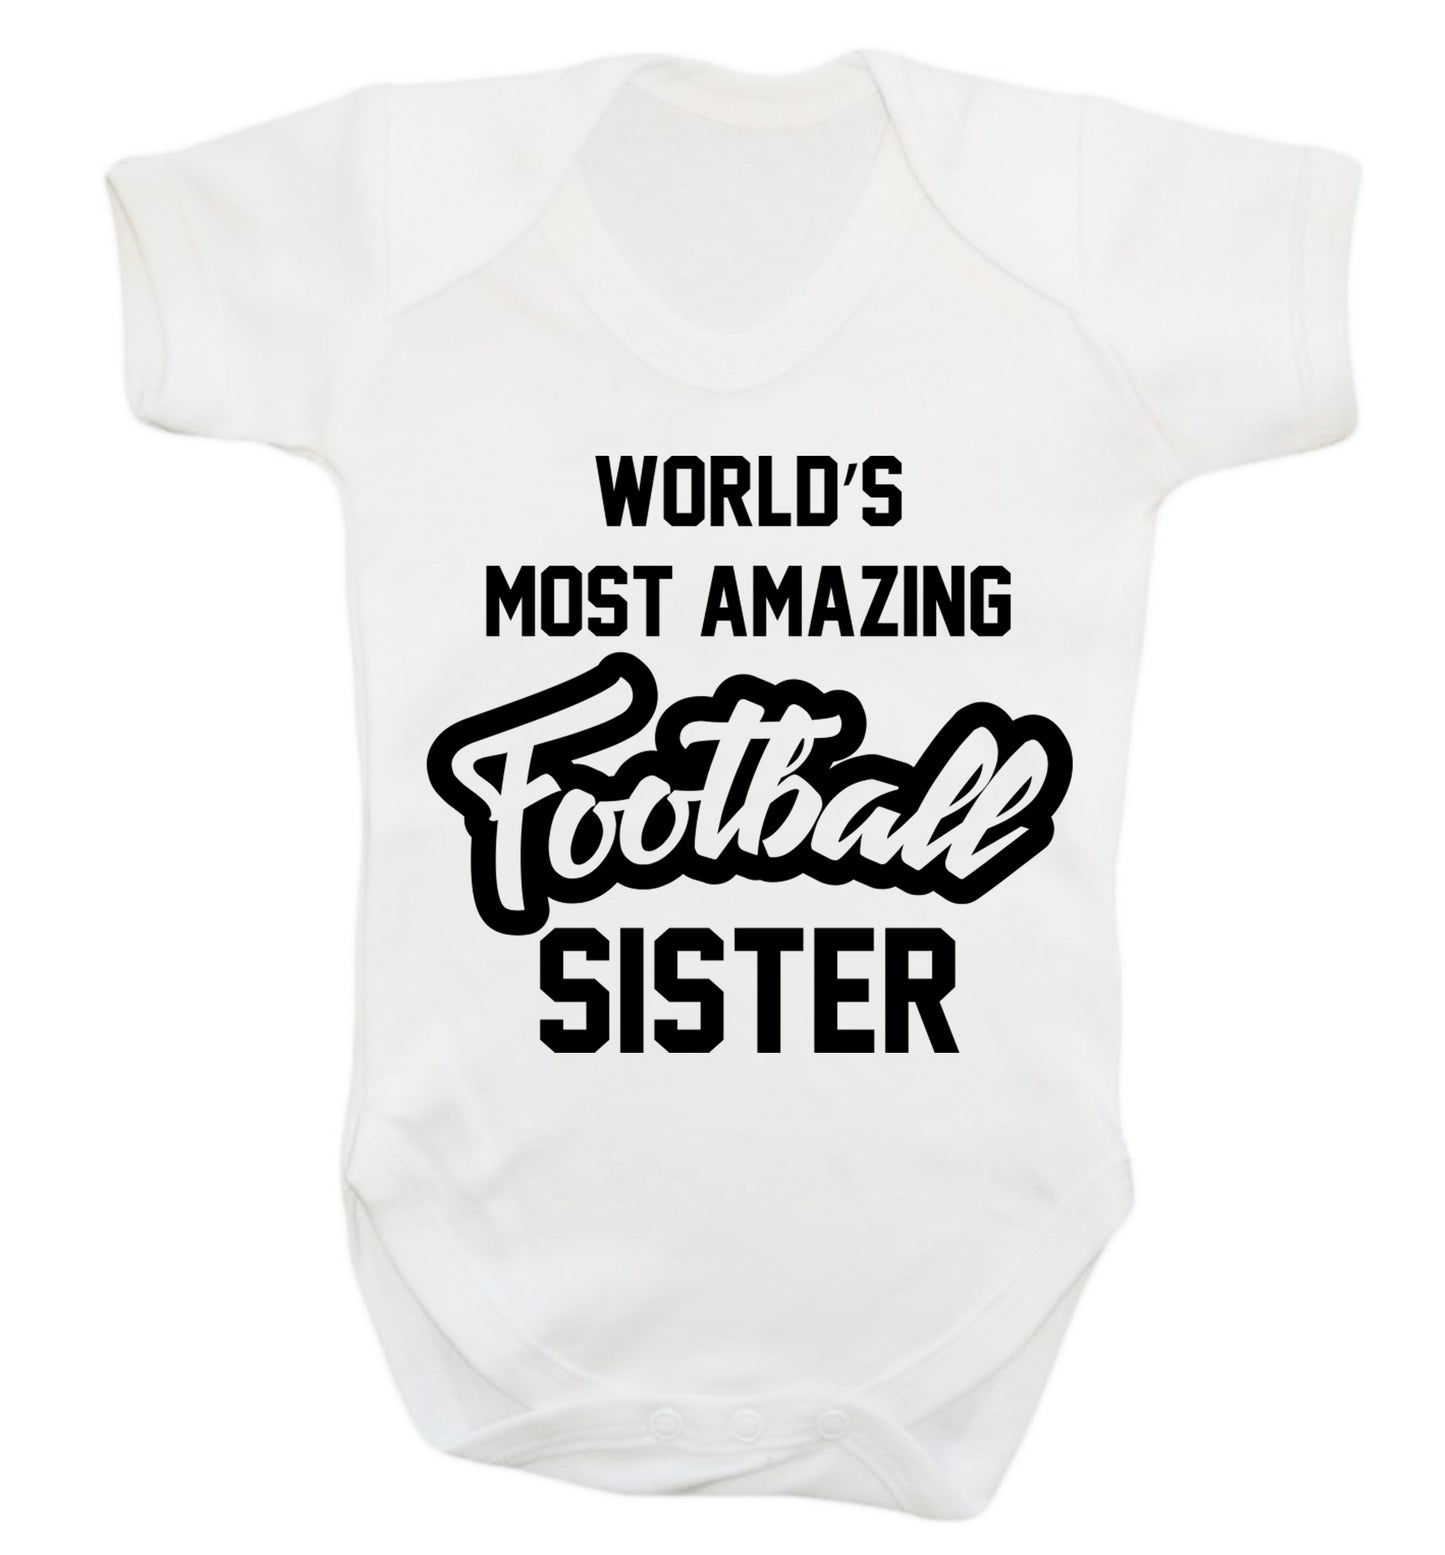 Worlds most amazing football sister Baby Vest white 18-24 months